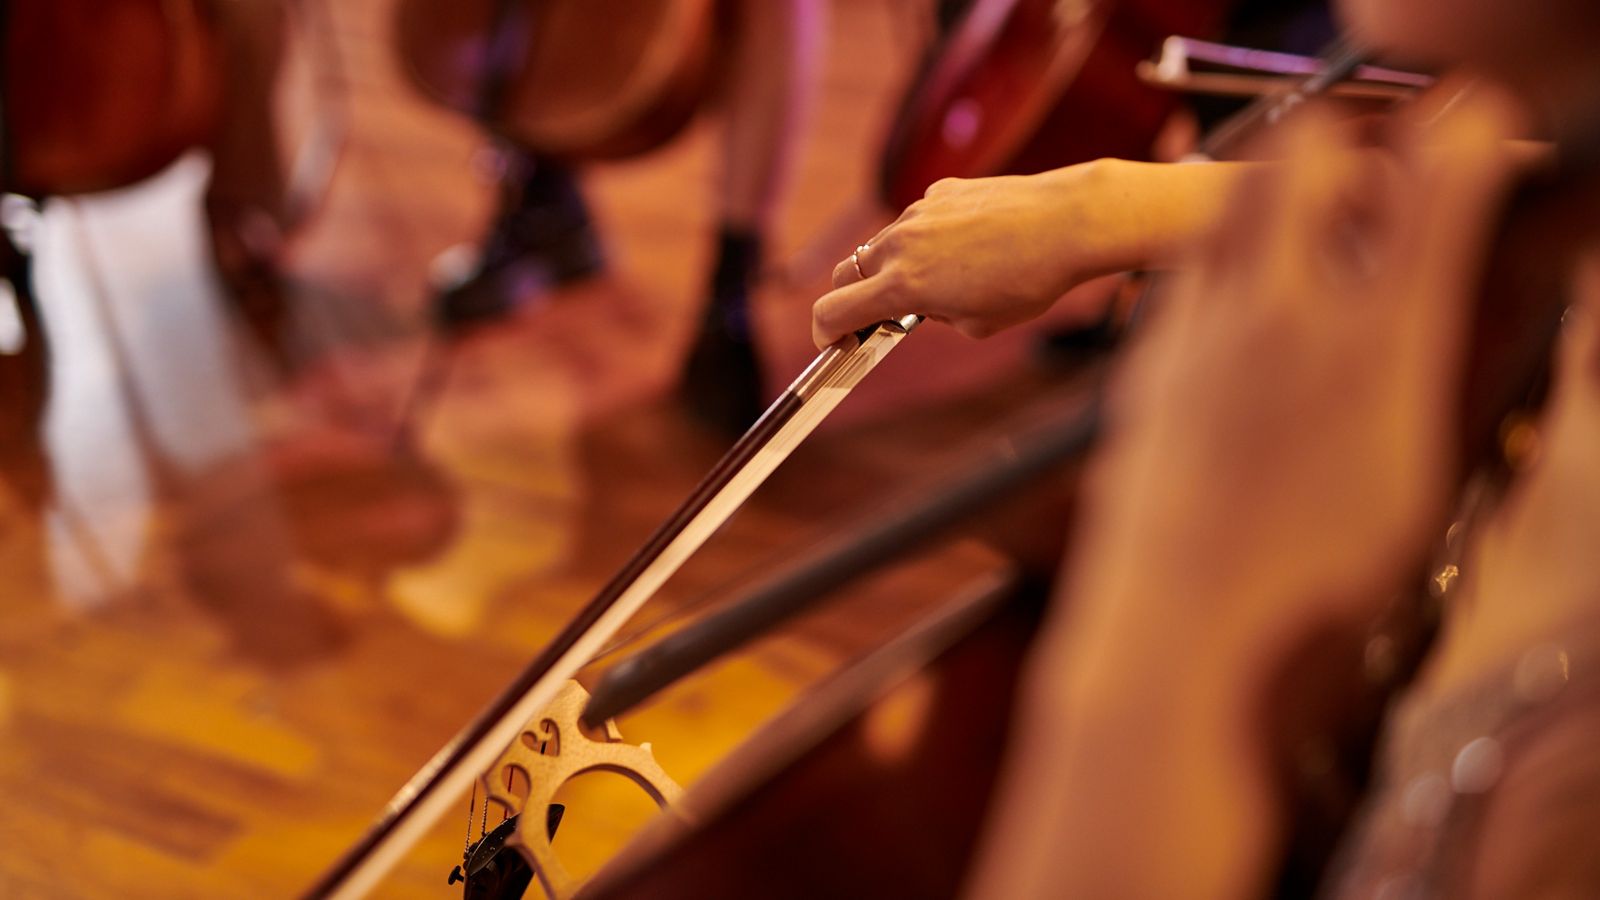 A close up of a violin being played